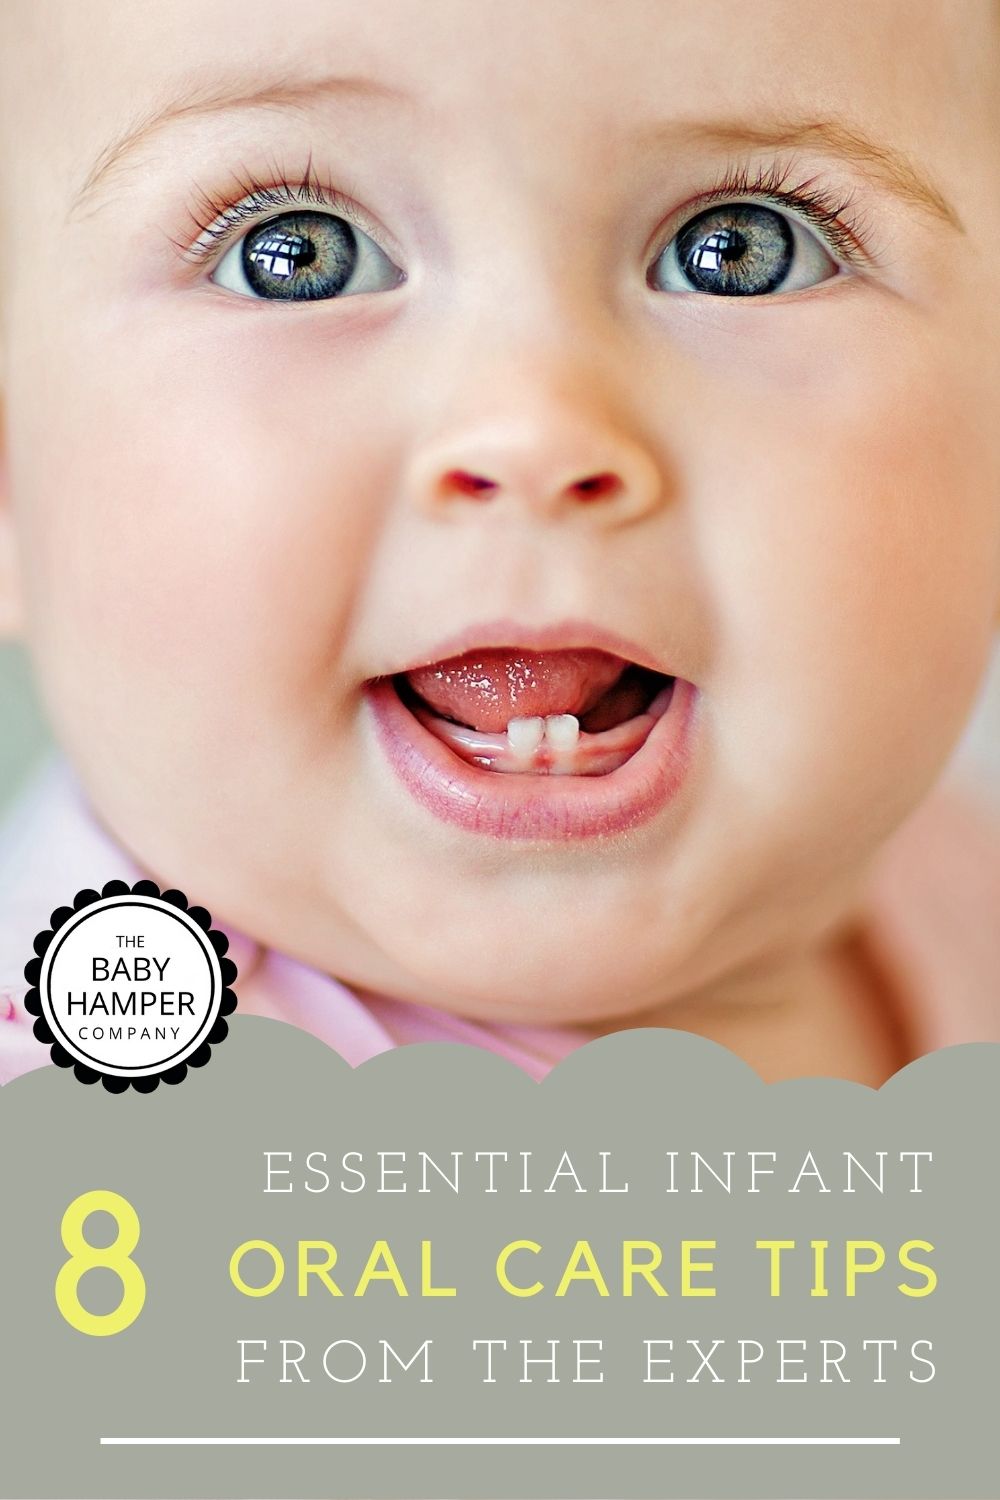 8 Essential Infant Oral Care Tips From the Experts